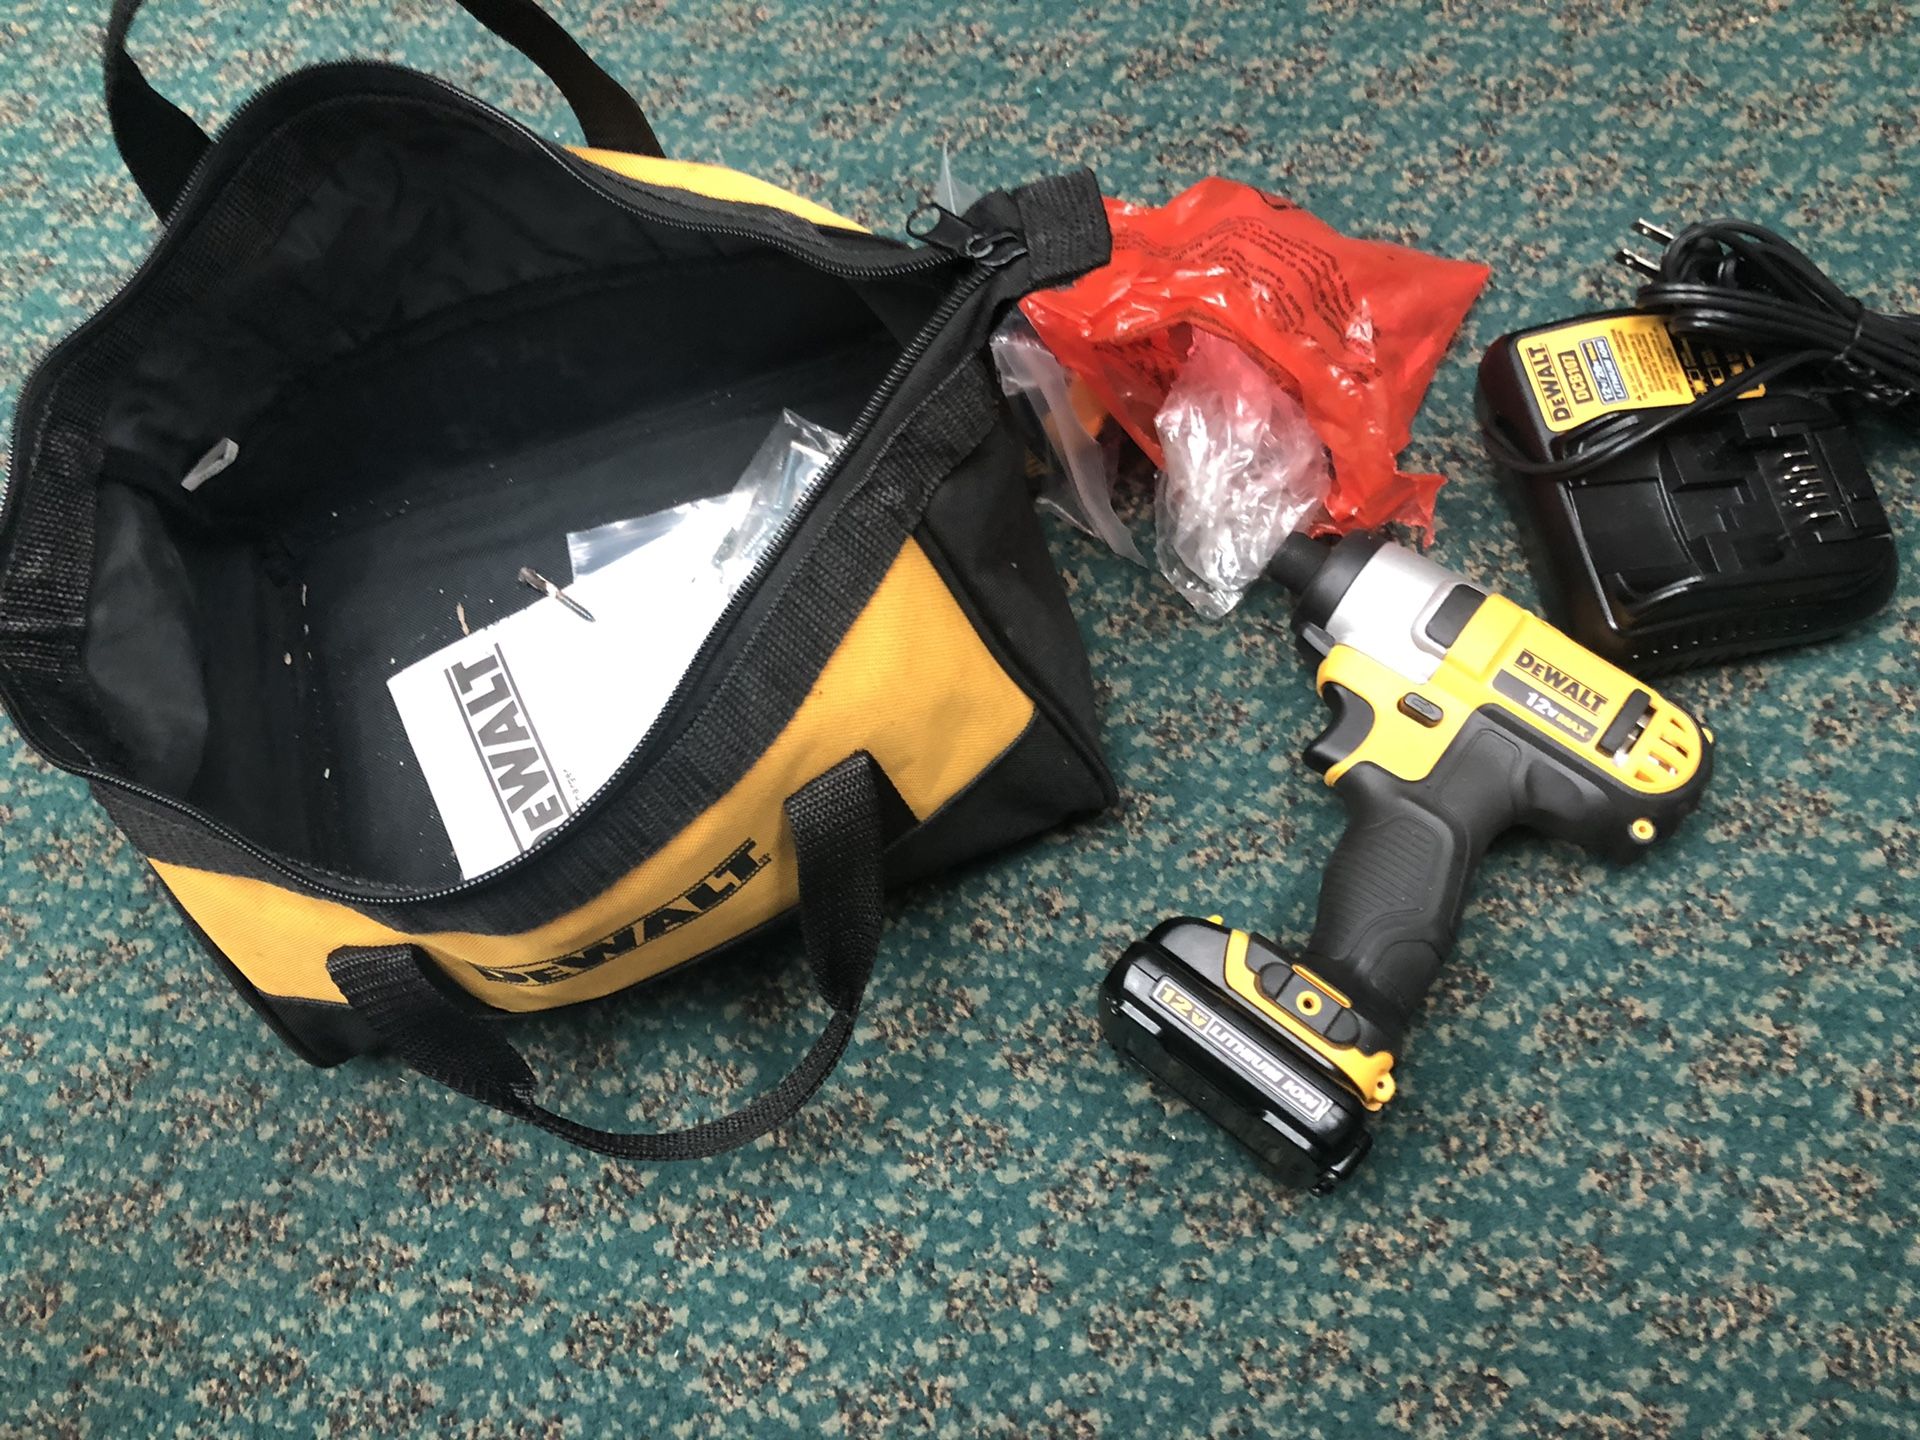 Drill, Tools-Power Dewalt Drill W/2 Batteries & Charger.. Negotiable